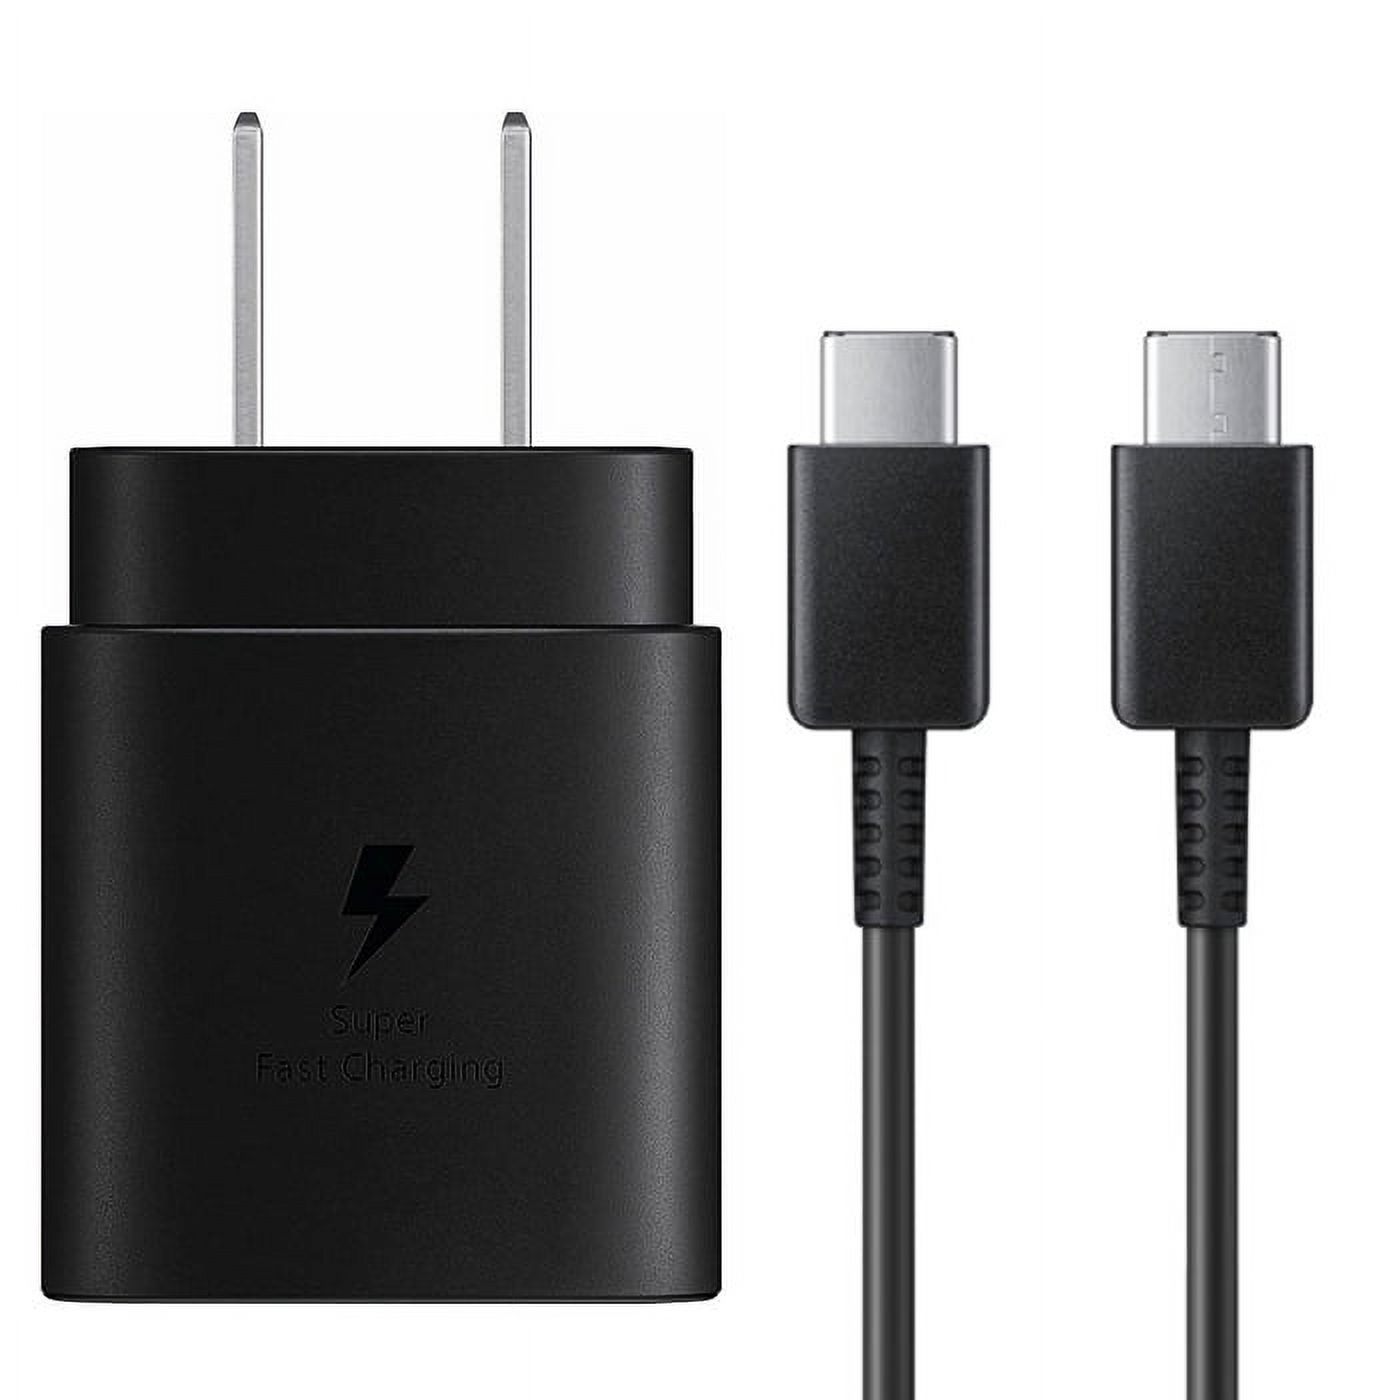 Samsung OEM Adaptive Super Fast Charger for Samsung Galaxy S20 S20+ Plus S20 Ultra S21 S21+ Ultra Note10 Note20 Real 25W USB Super Fast Wall Charger Adapter + 3FT USB-C Type C Cable Cord Kit - image 2 of 5